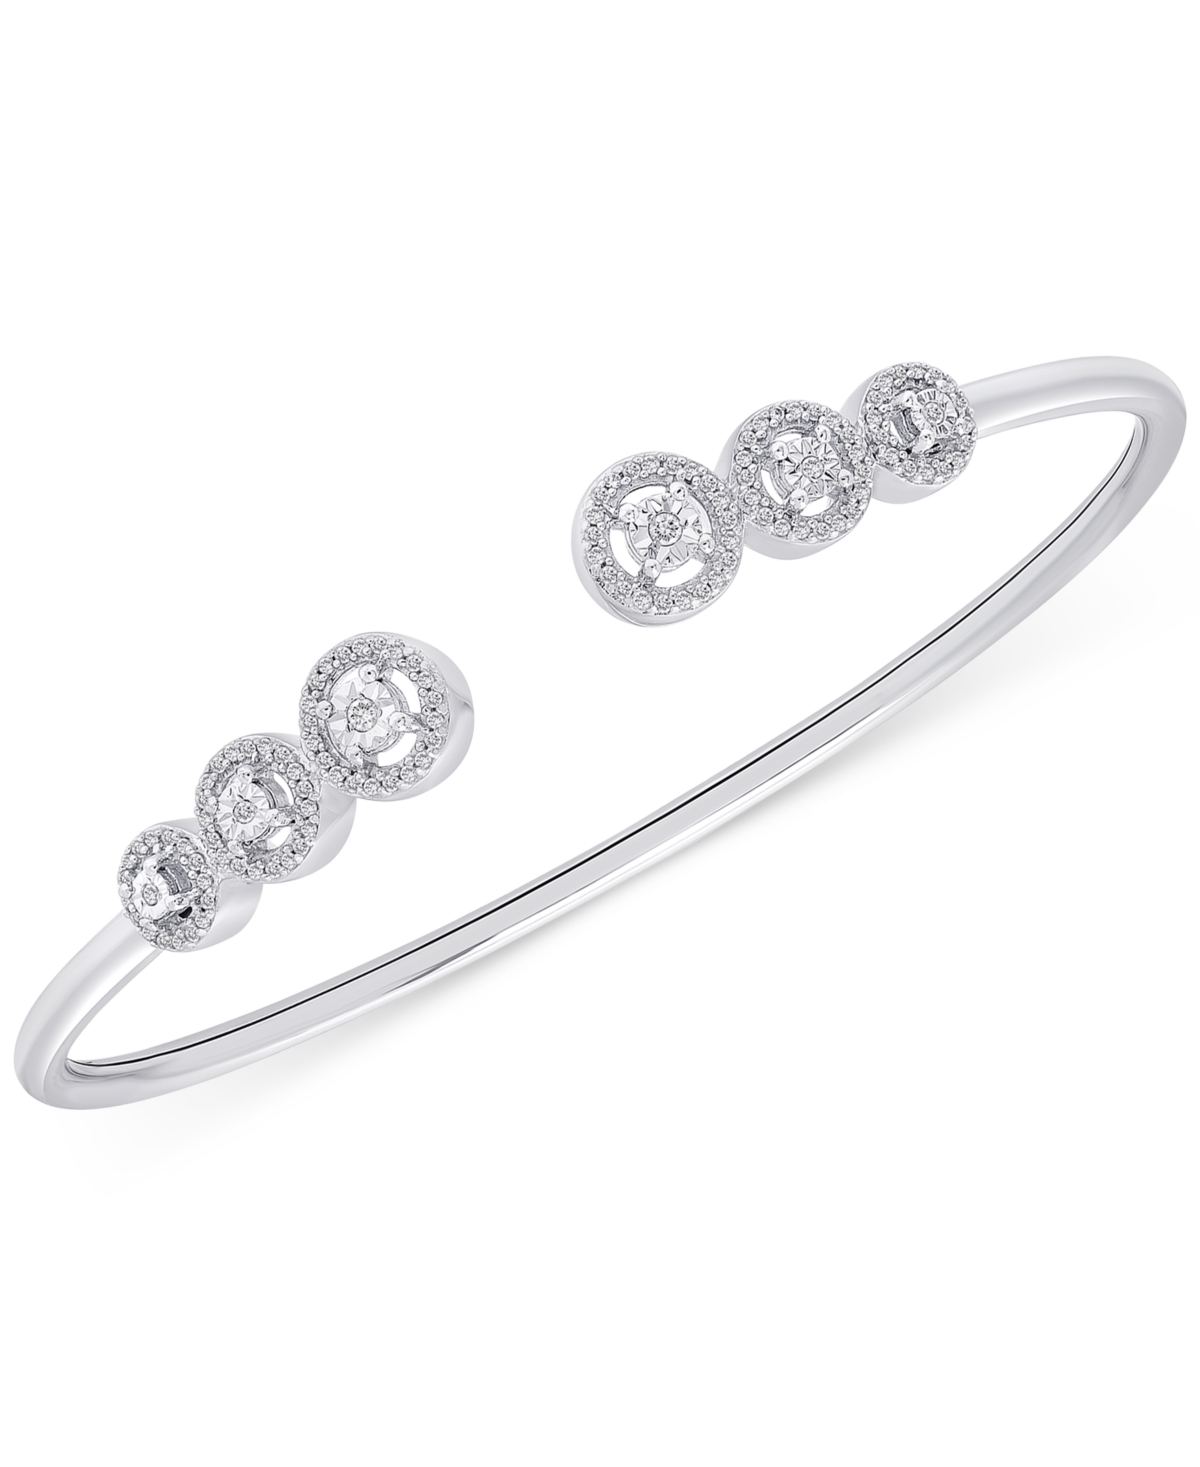 Diamond Multi-Halo Cuff Bangle Bracelet (1/4 ct. t.w.) in Sterling Silver, Created for Macy's - Sterling Silver